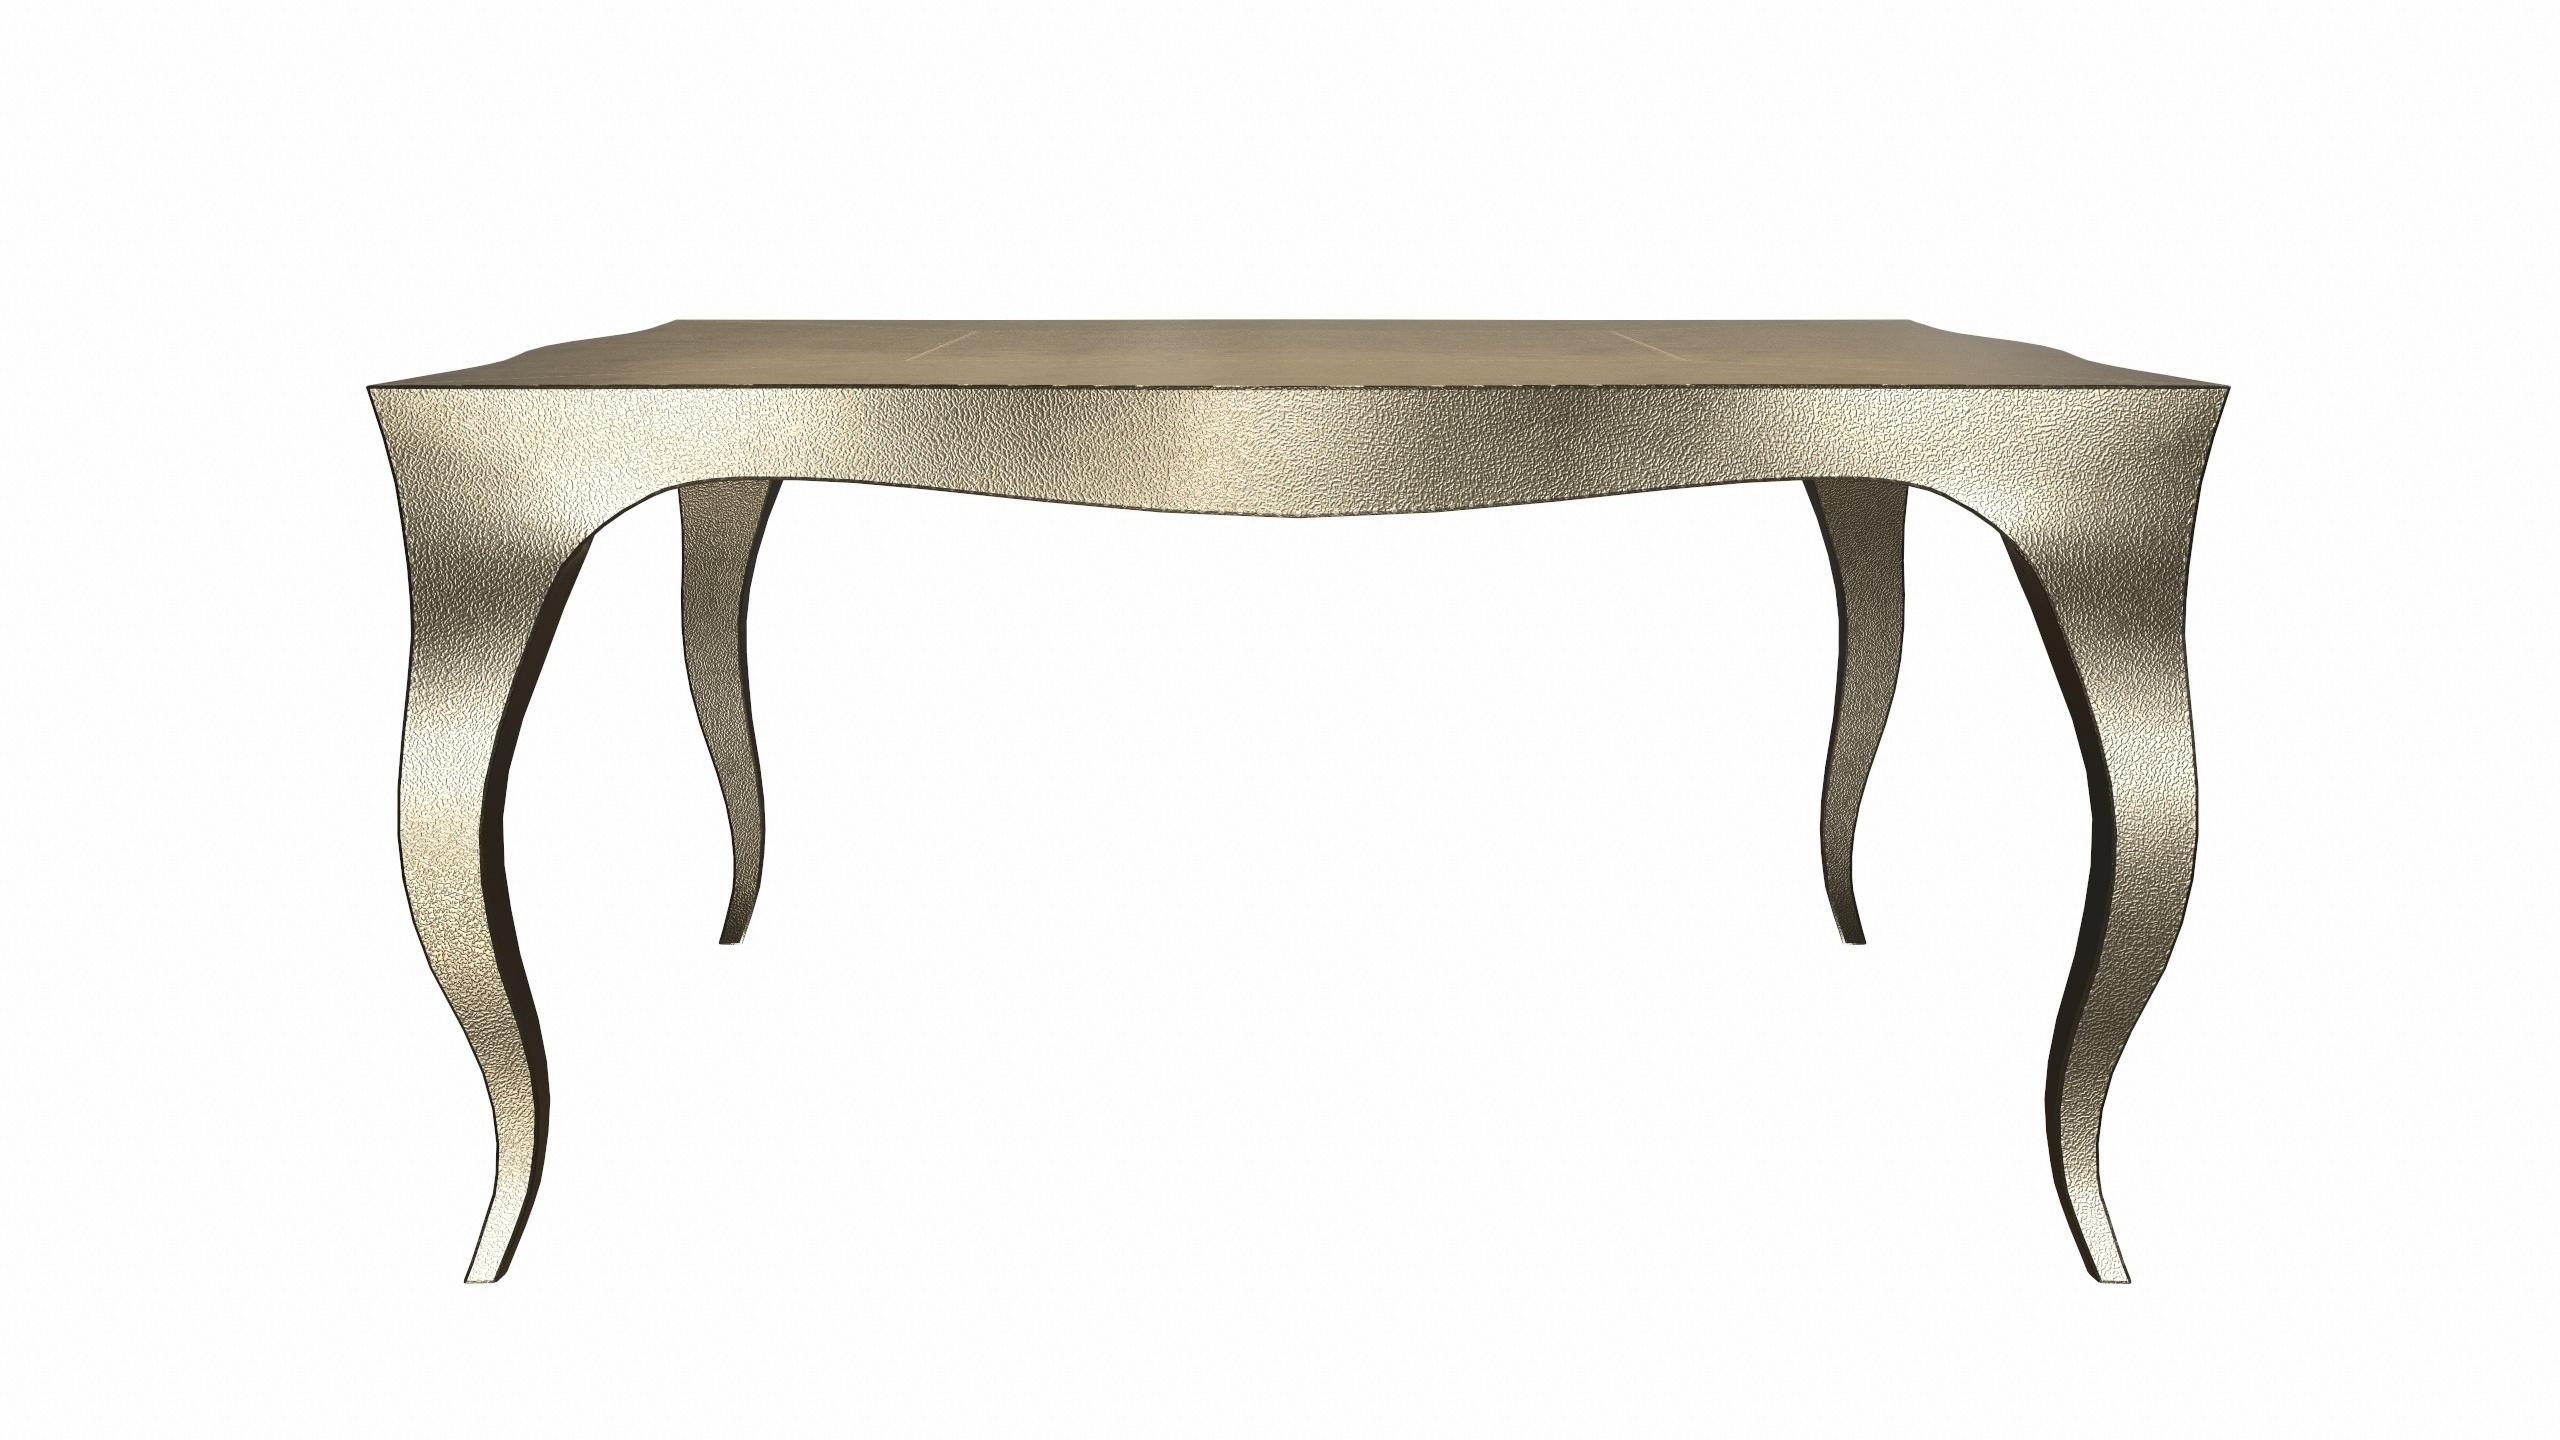 American Louise Art Deco Industrial and Work Tables Sideboard Fine Hammered Brass  For Sale